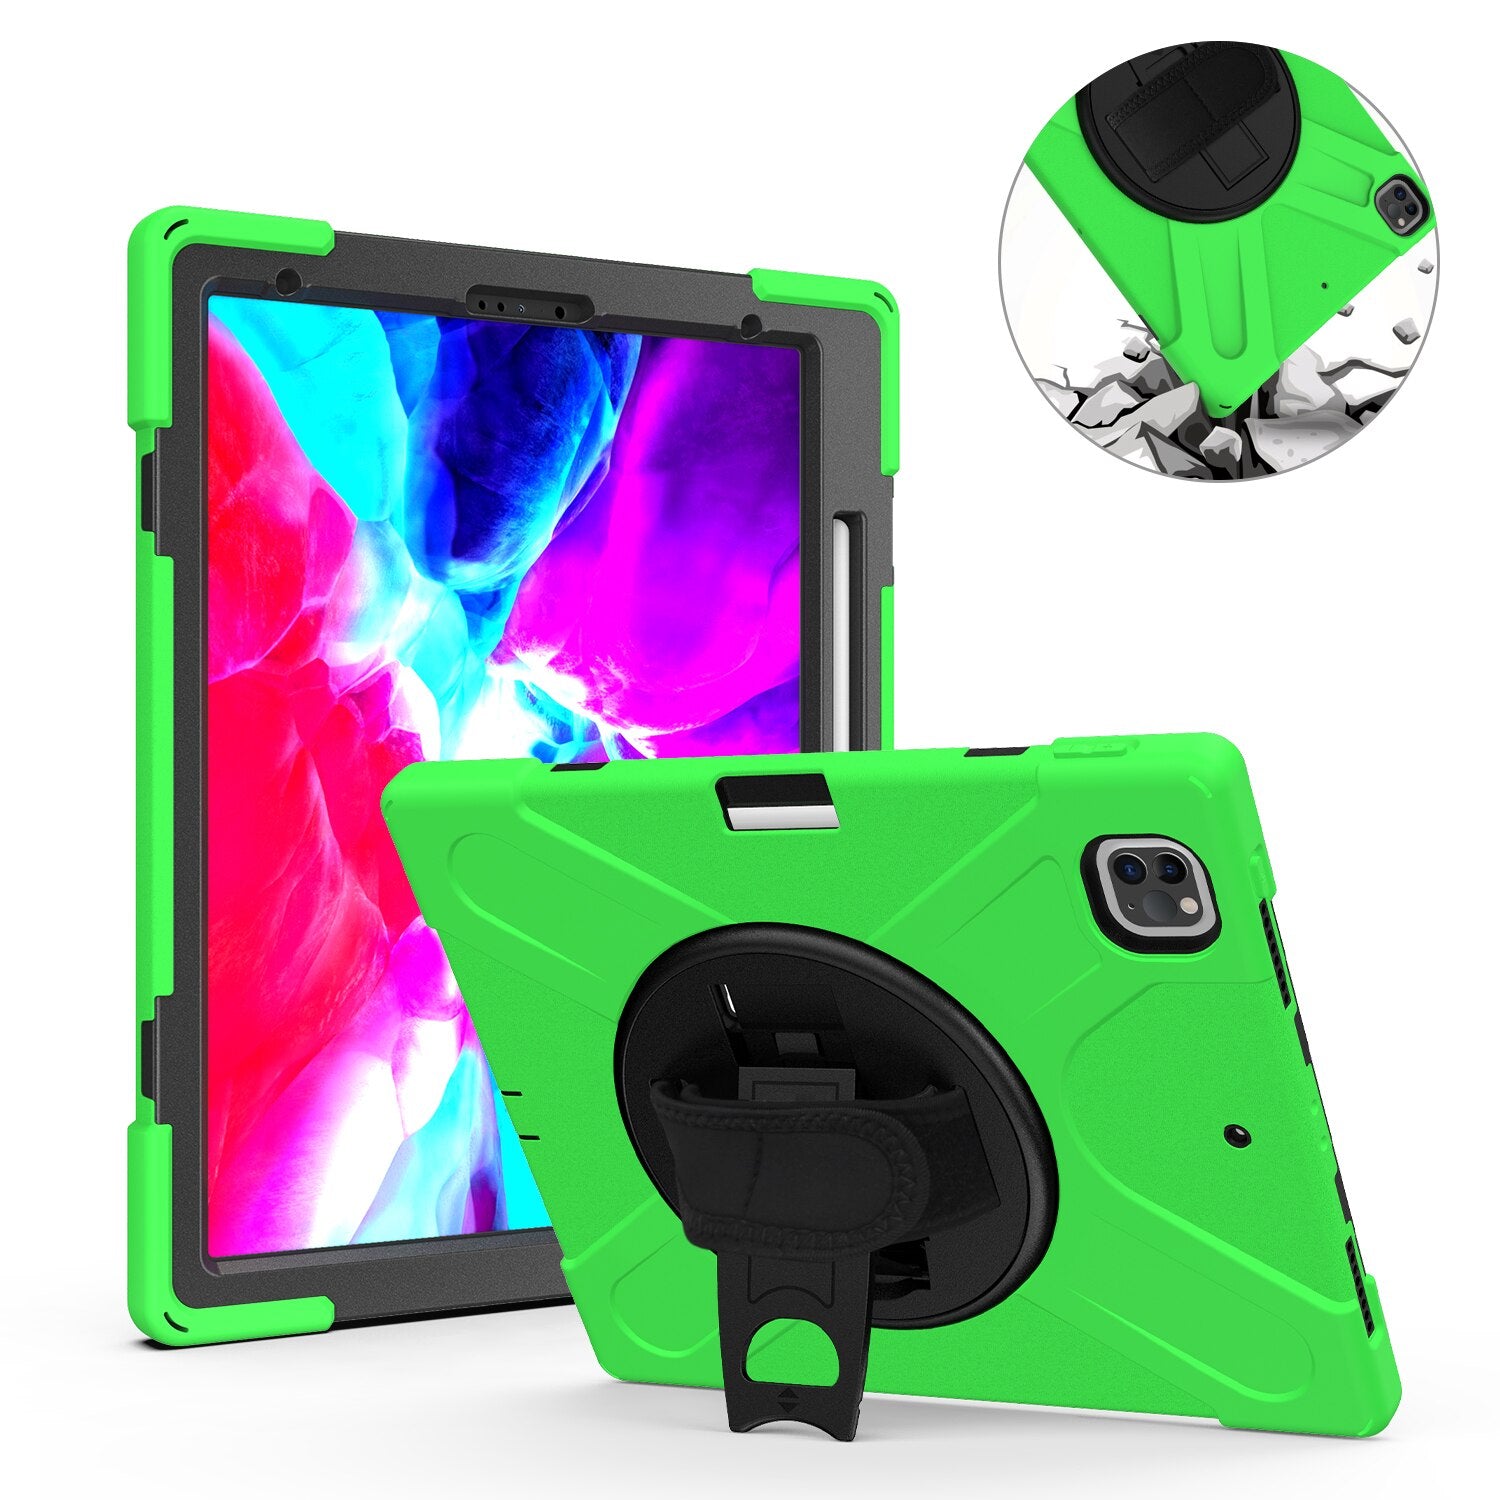 For iPad Pro 12.9" Case with Pencil Holder 4th Generation For Pro 10.5 Protective Case Silicone Shockproof For iPad Pro 11 2020 - 200001091 Bright Green / United States / For iPad Pro 10.5 Find Epic Store